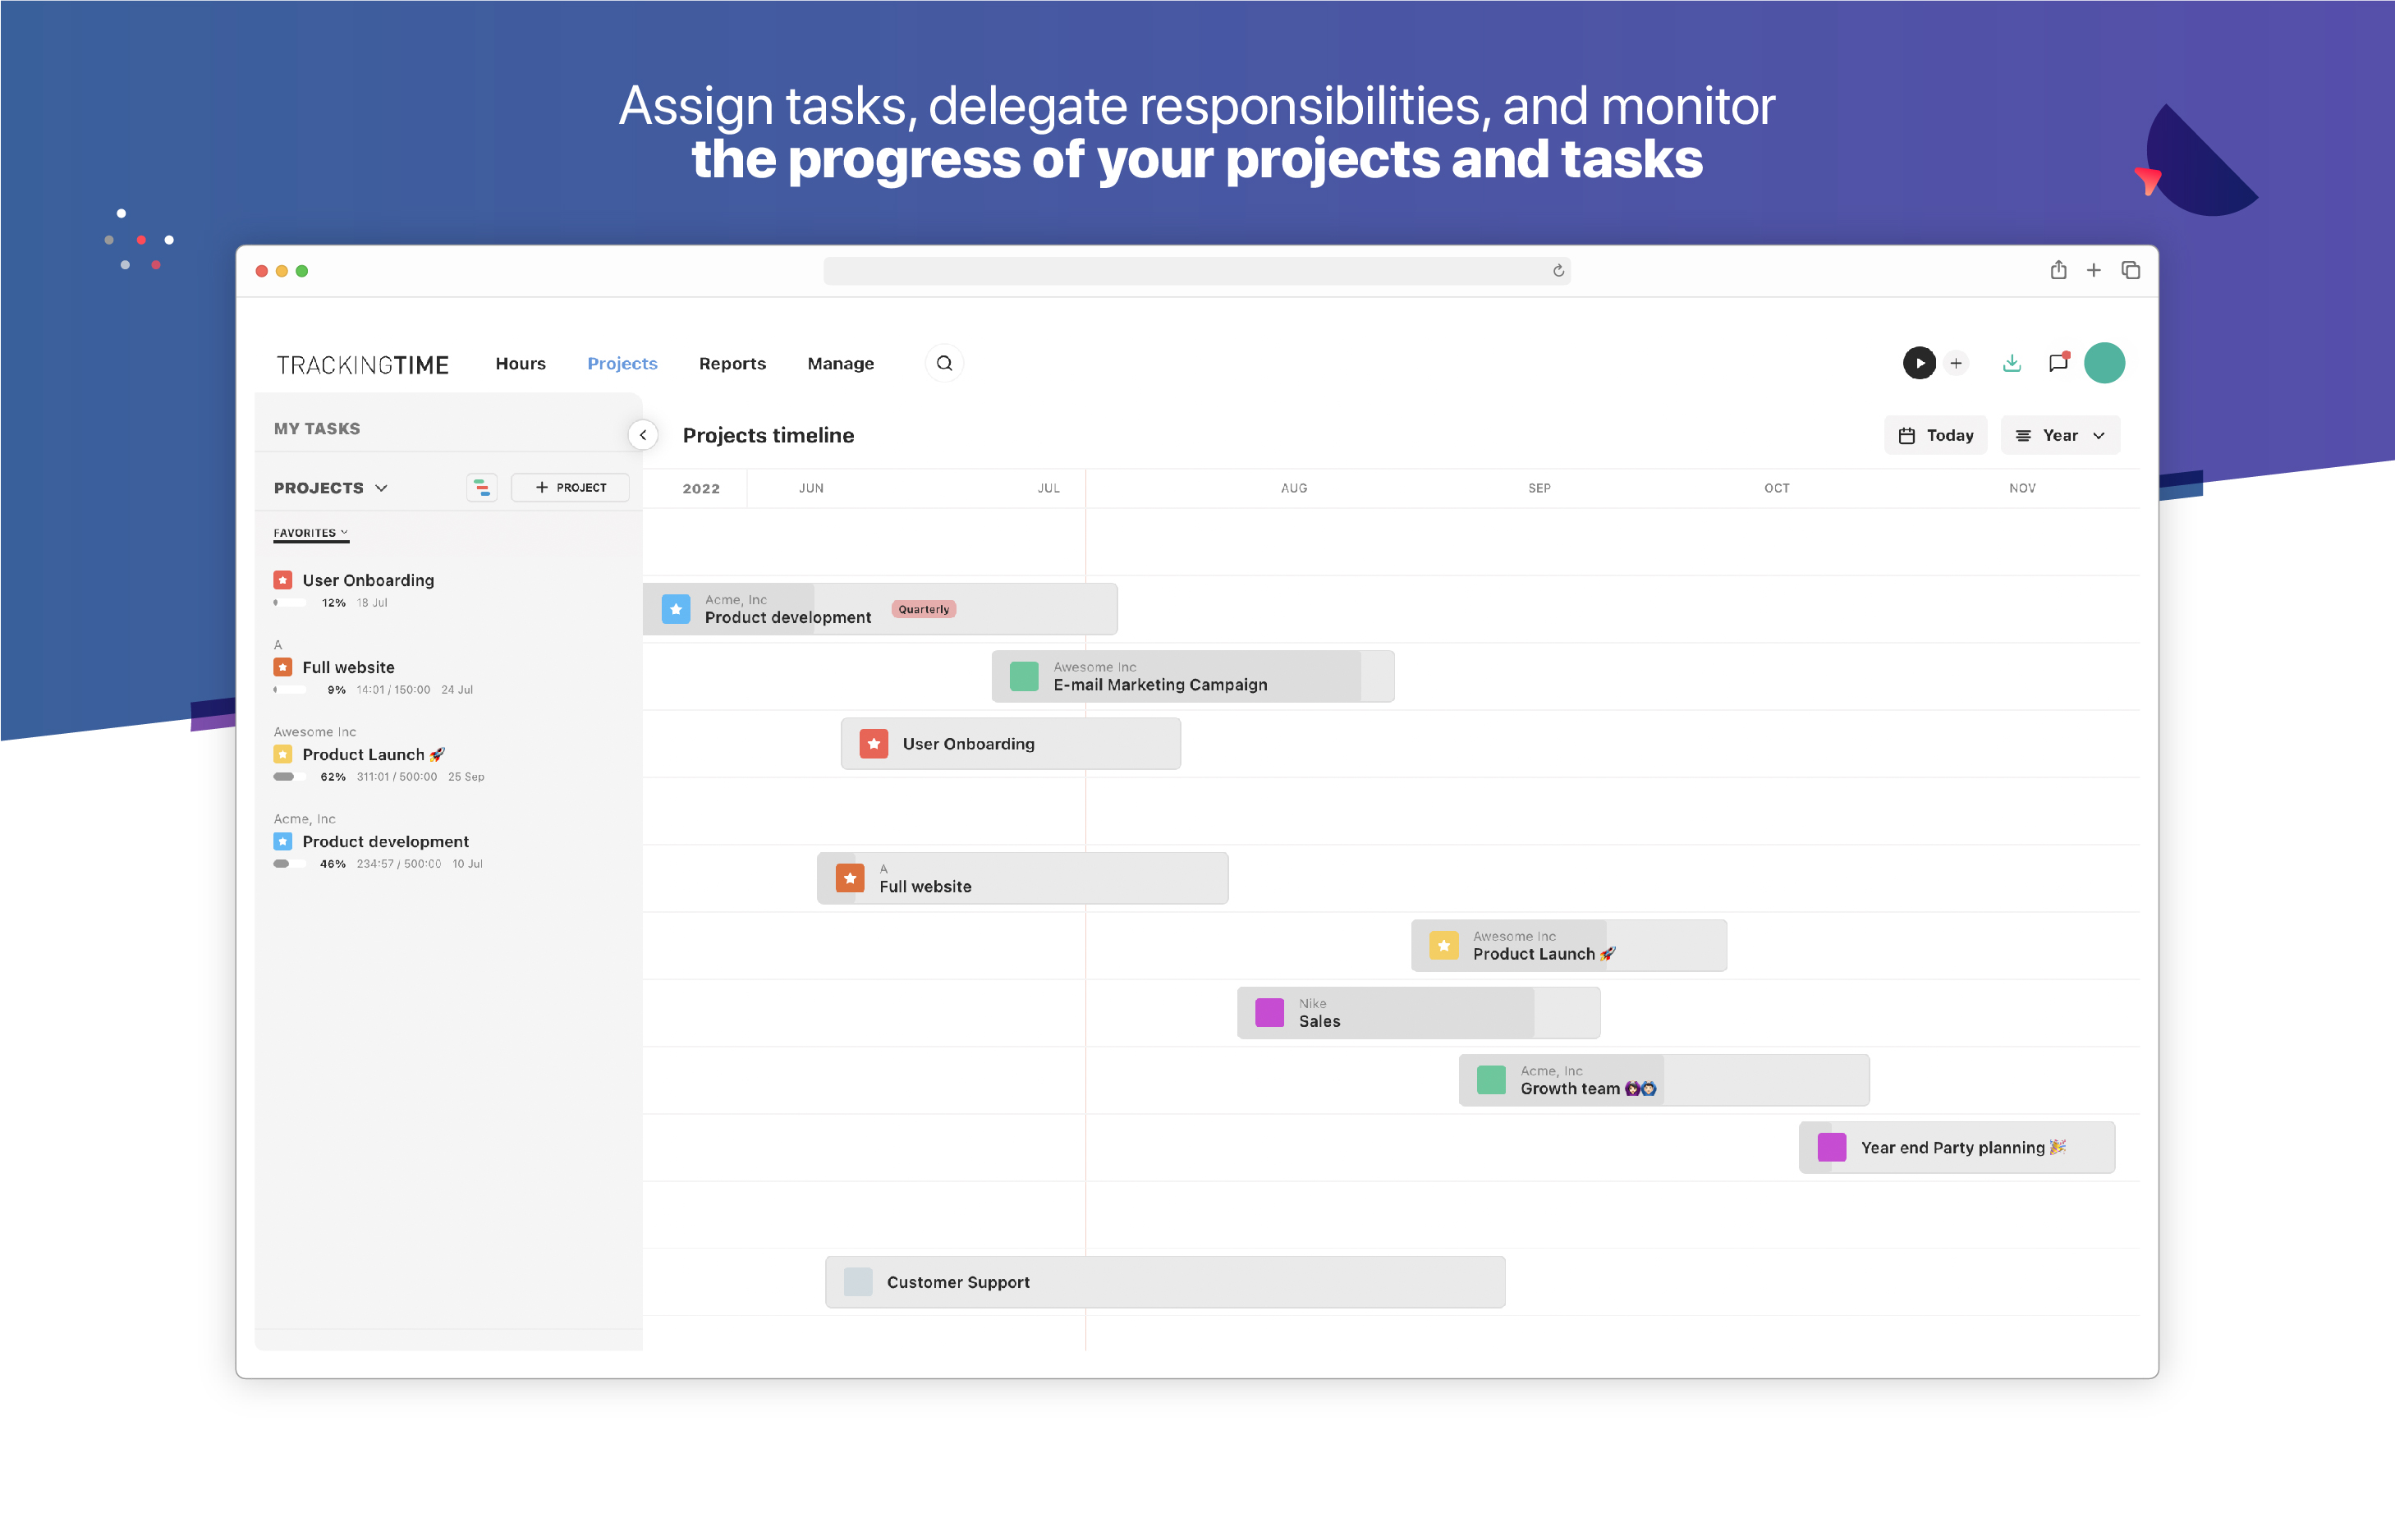 Assign tasks, delegate responsabilities, and monitor the progress of your projects and tasks.